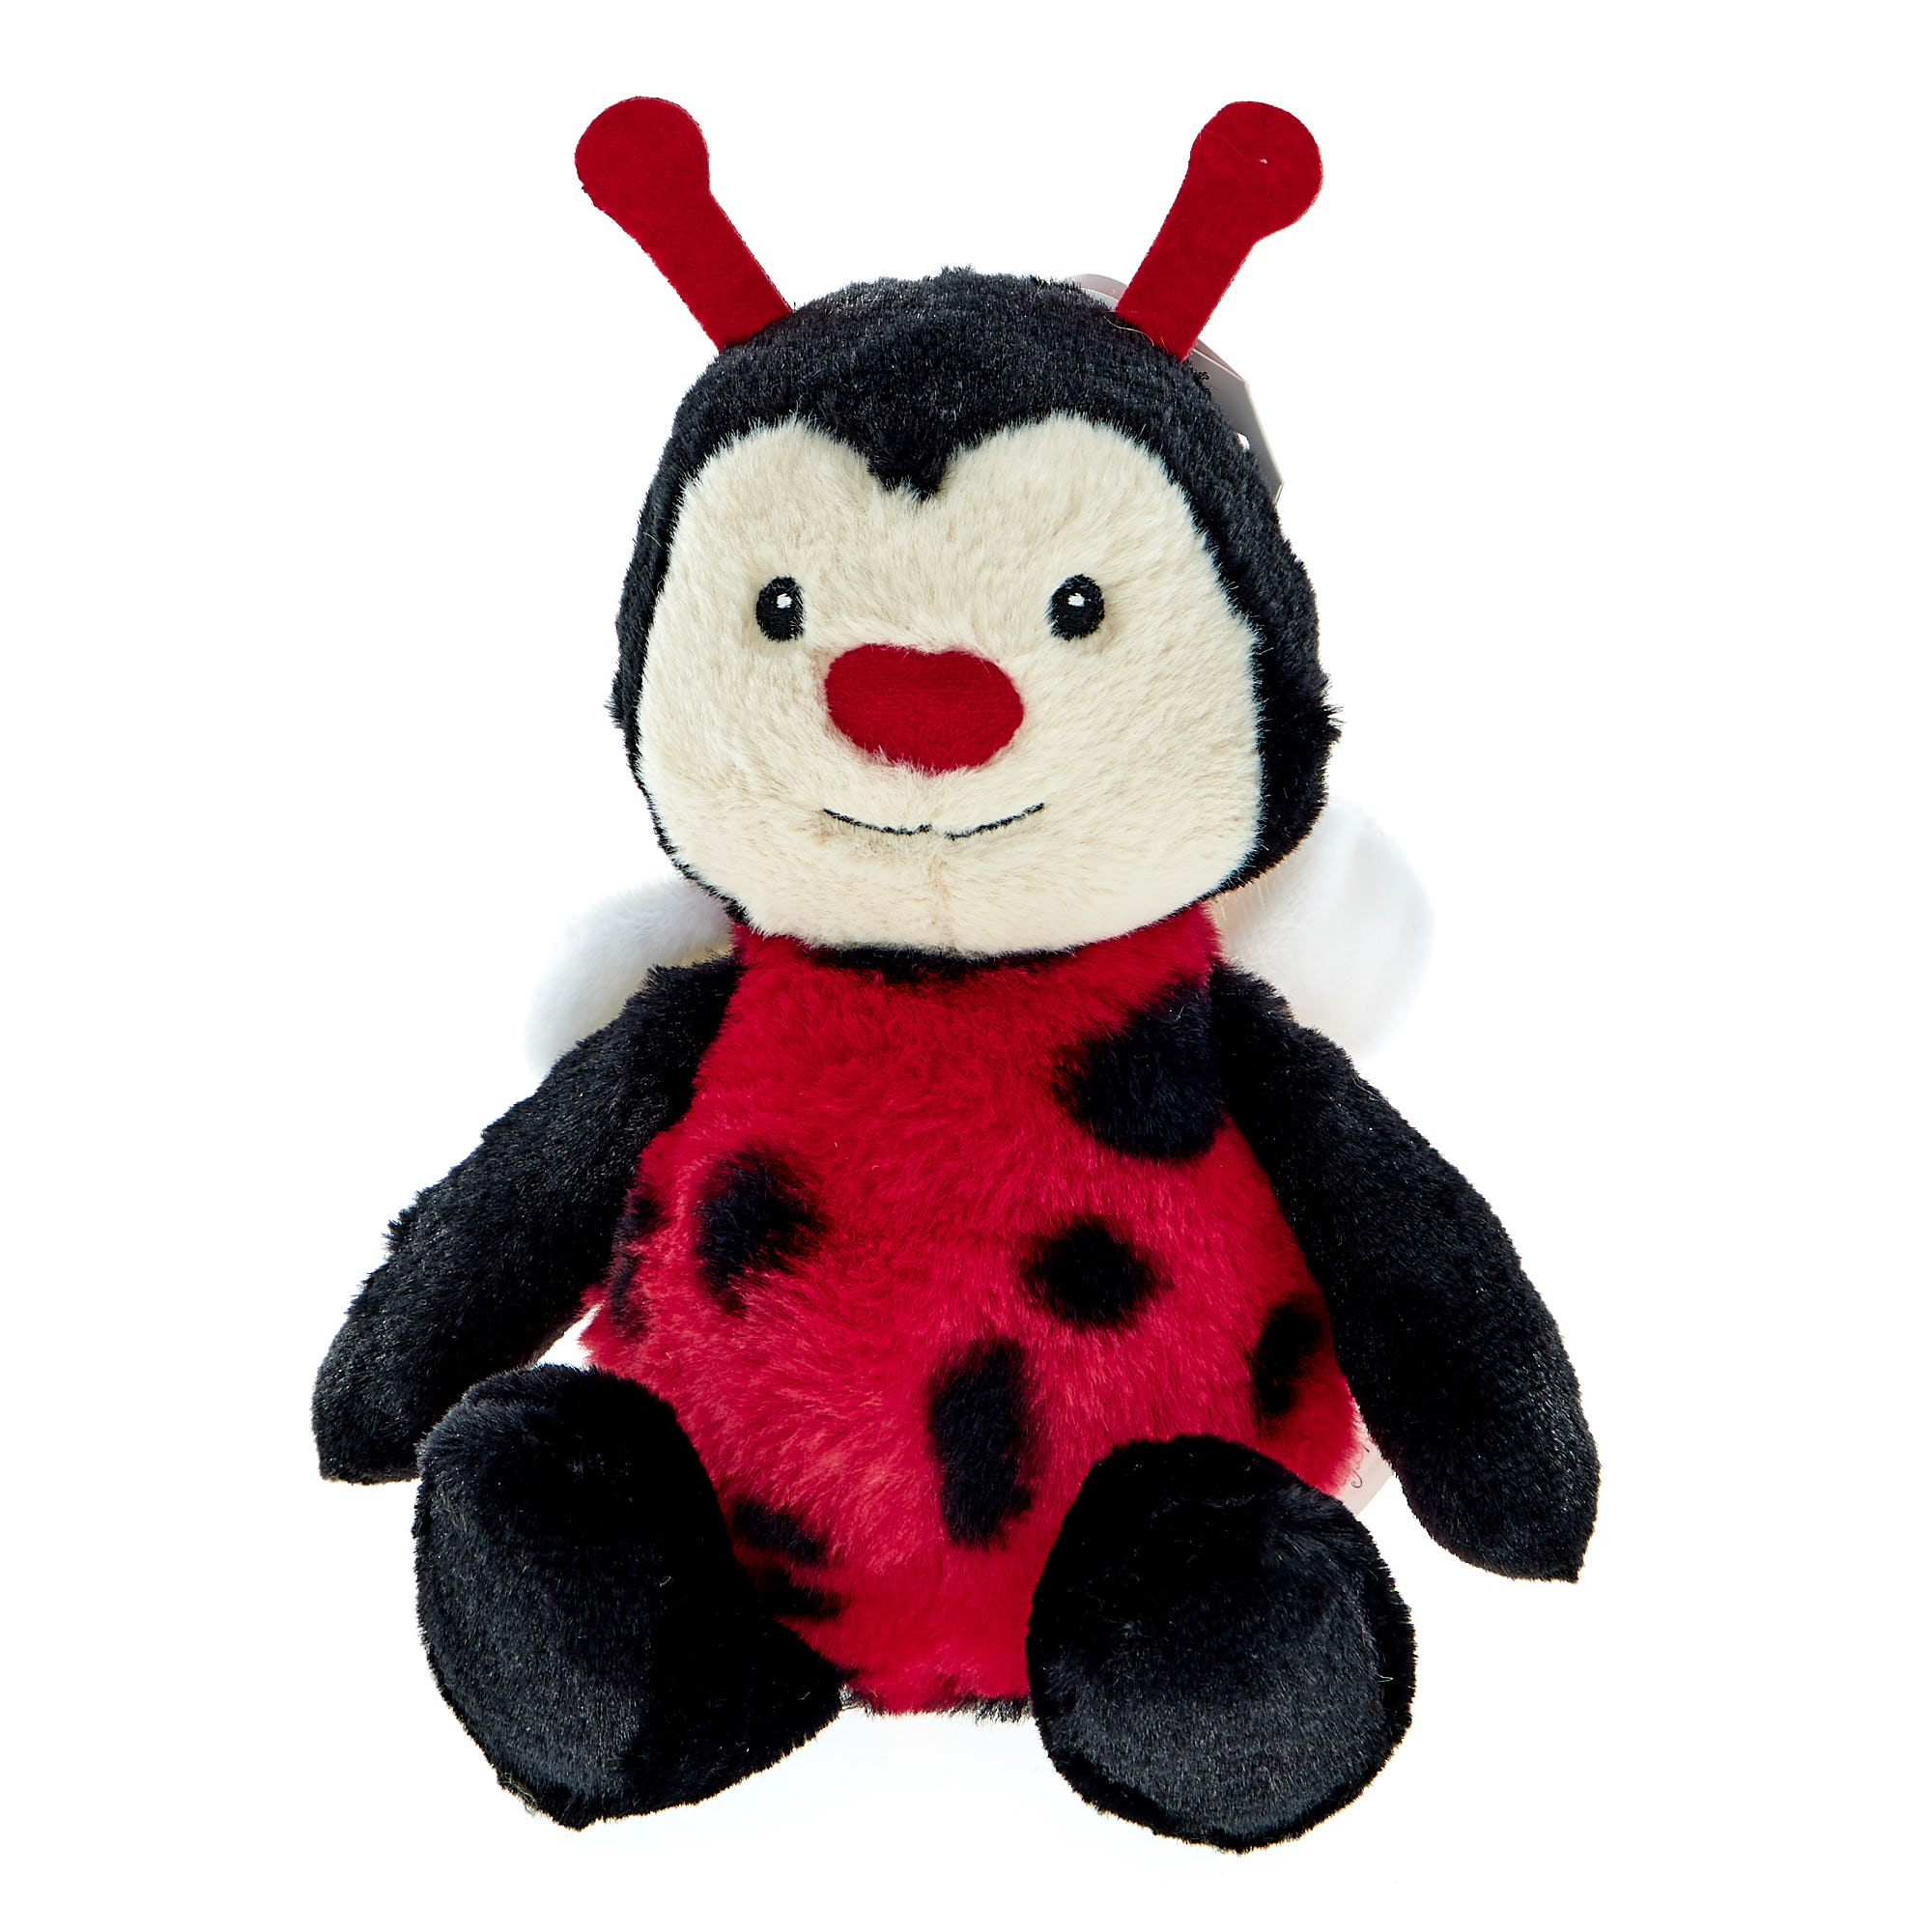 Buy Ladybird Soft Toy for GBP 2.99 | Card Factory UK